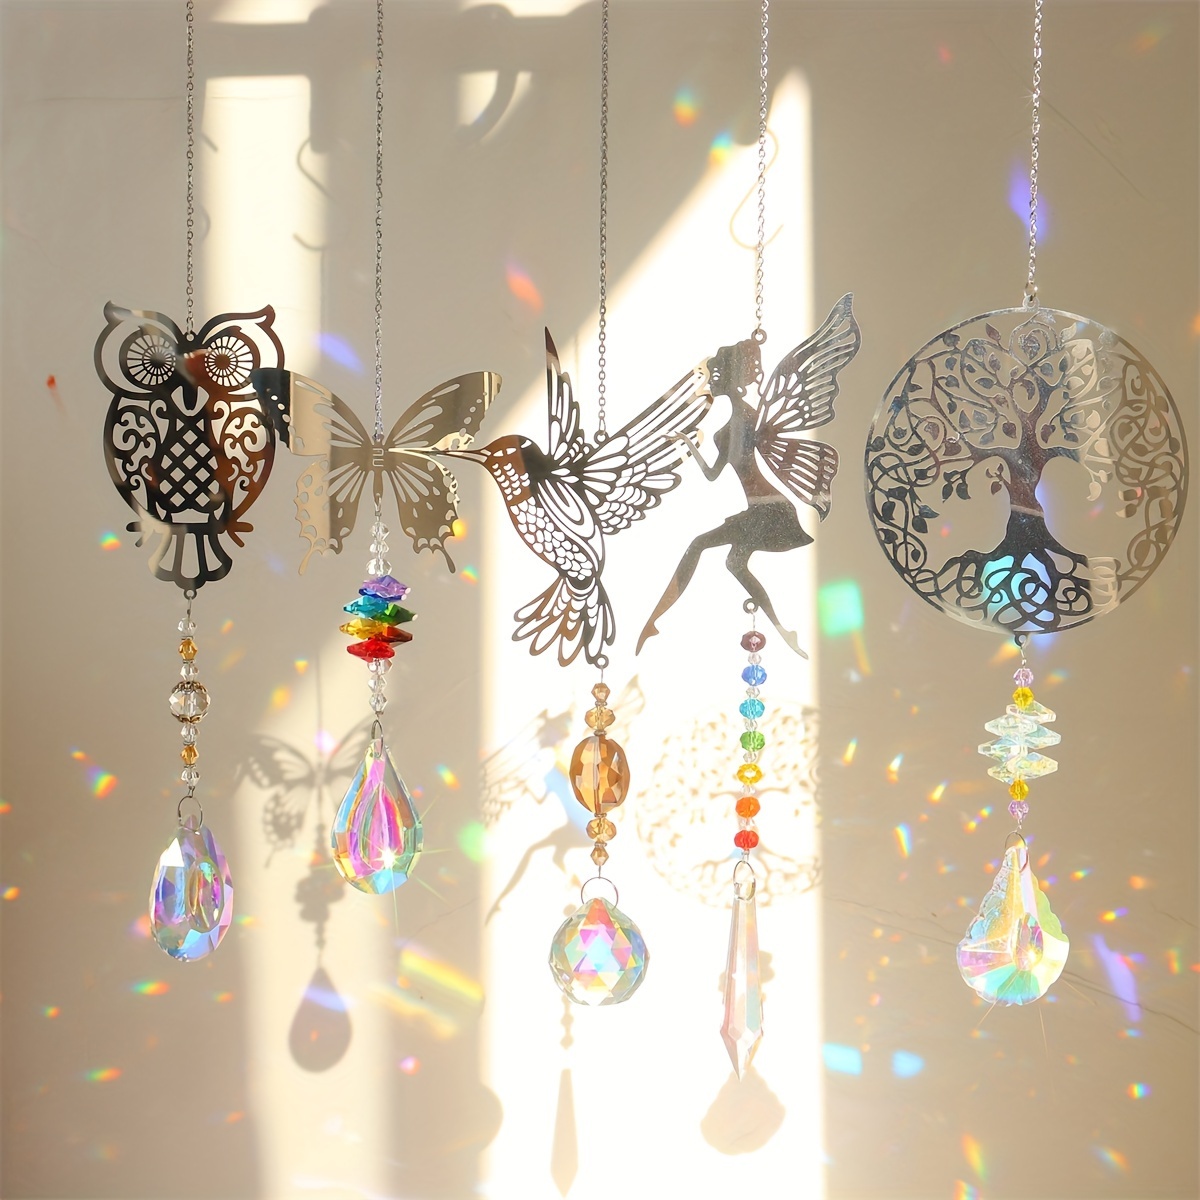 

5-piece Crystal Sun Catcher Set With Prism - Owl, Hummingbird & Butterfly Designs For Window Decor - Diy Rainbow Maker Kit, Perfect Gift Idea